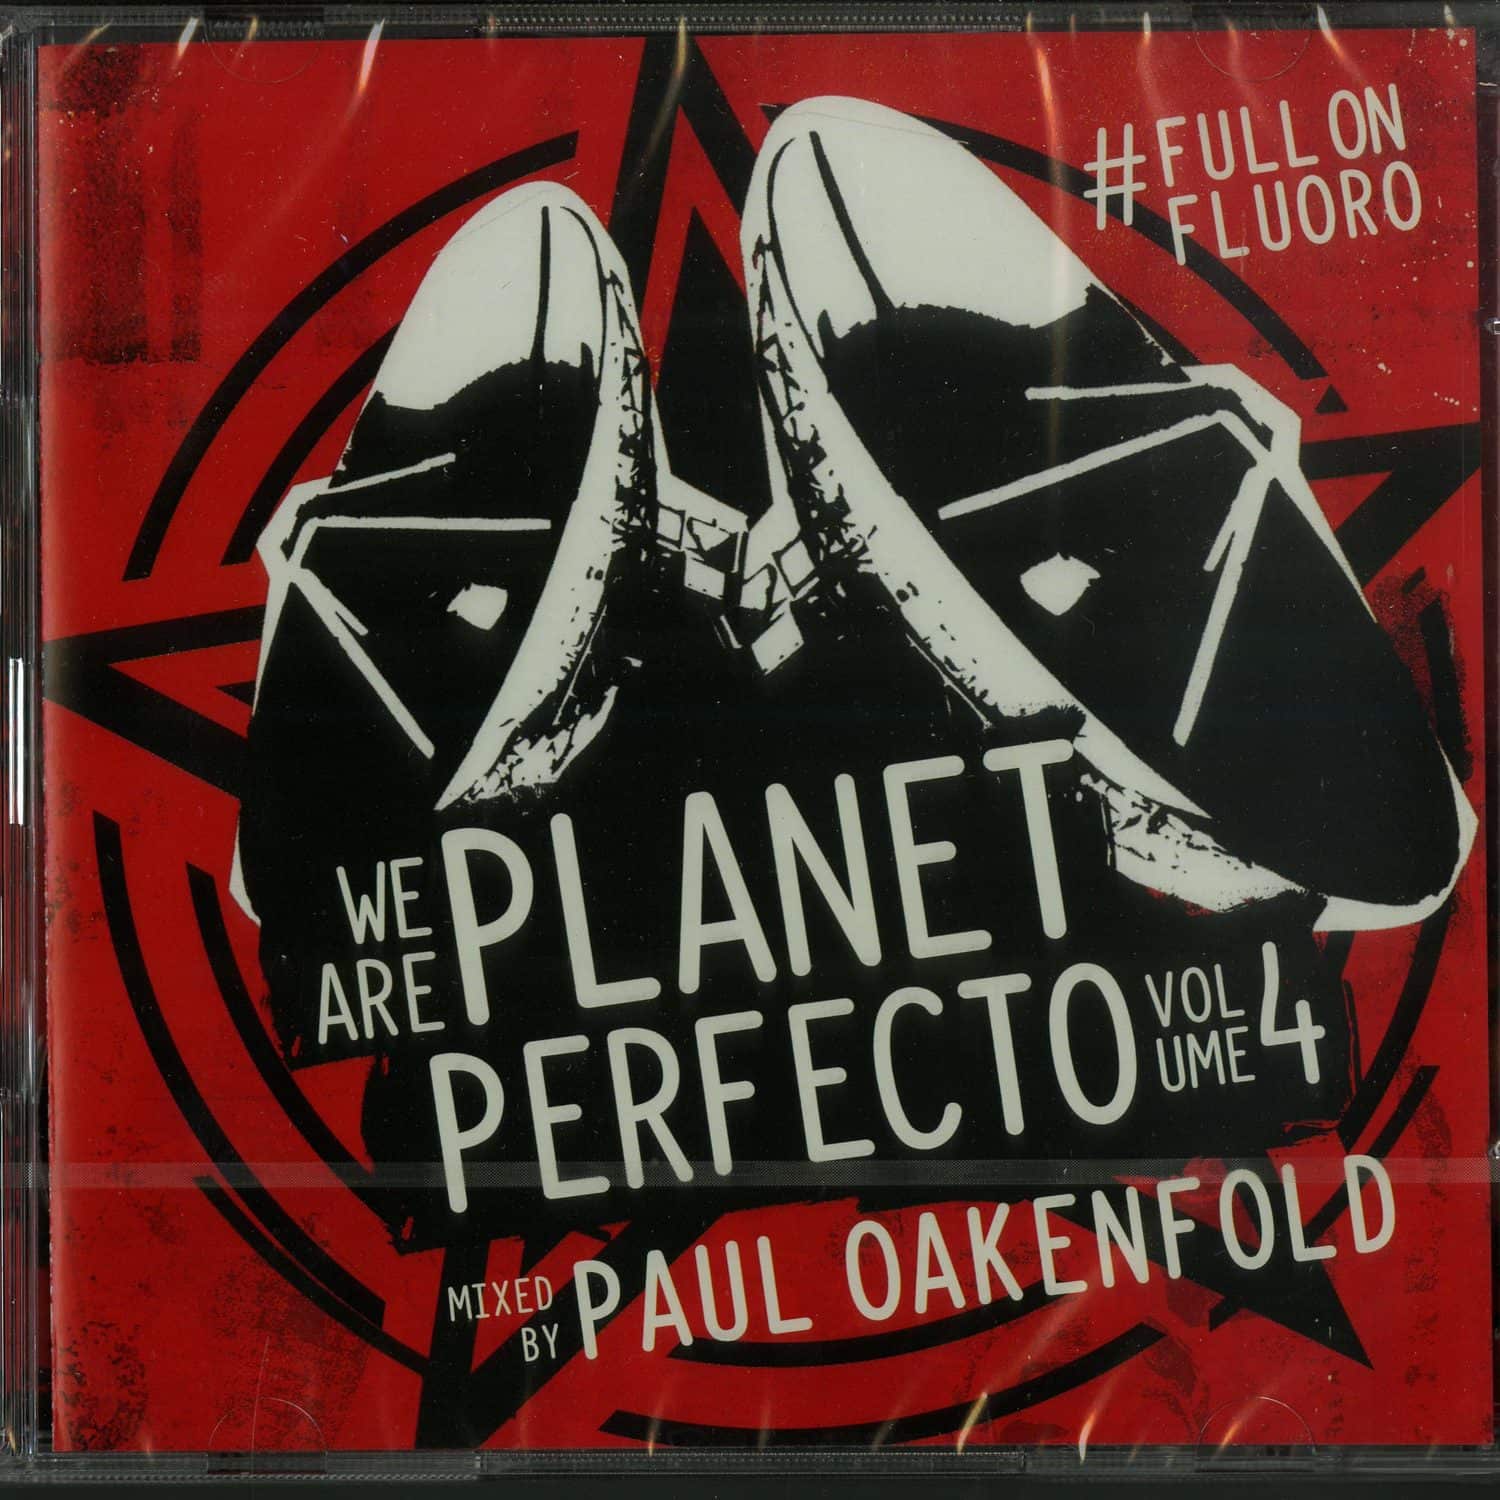 Paul Oakenfold - WE ARE PLANET PERFECTO VOL.4 - FULL ON FLUORO 